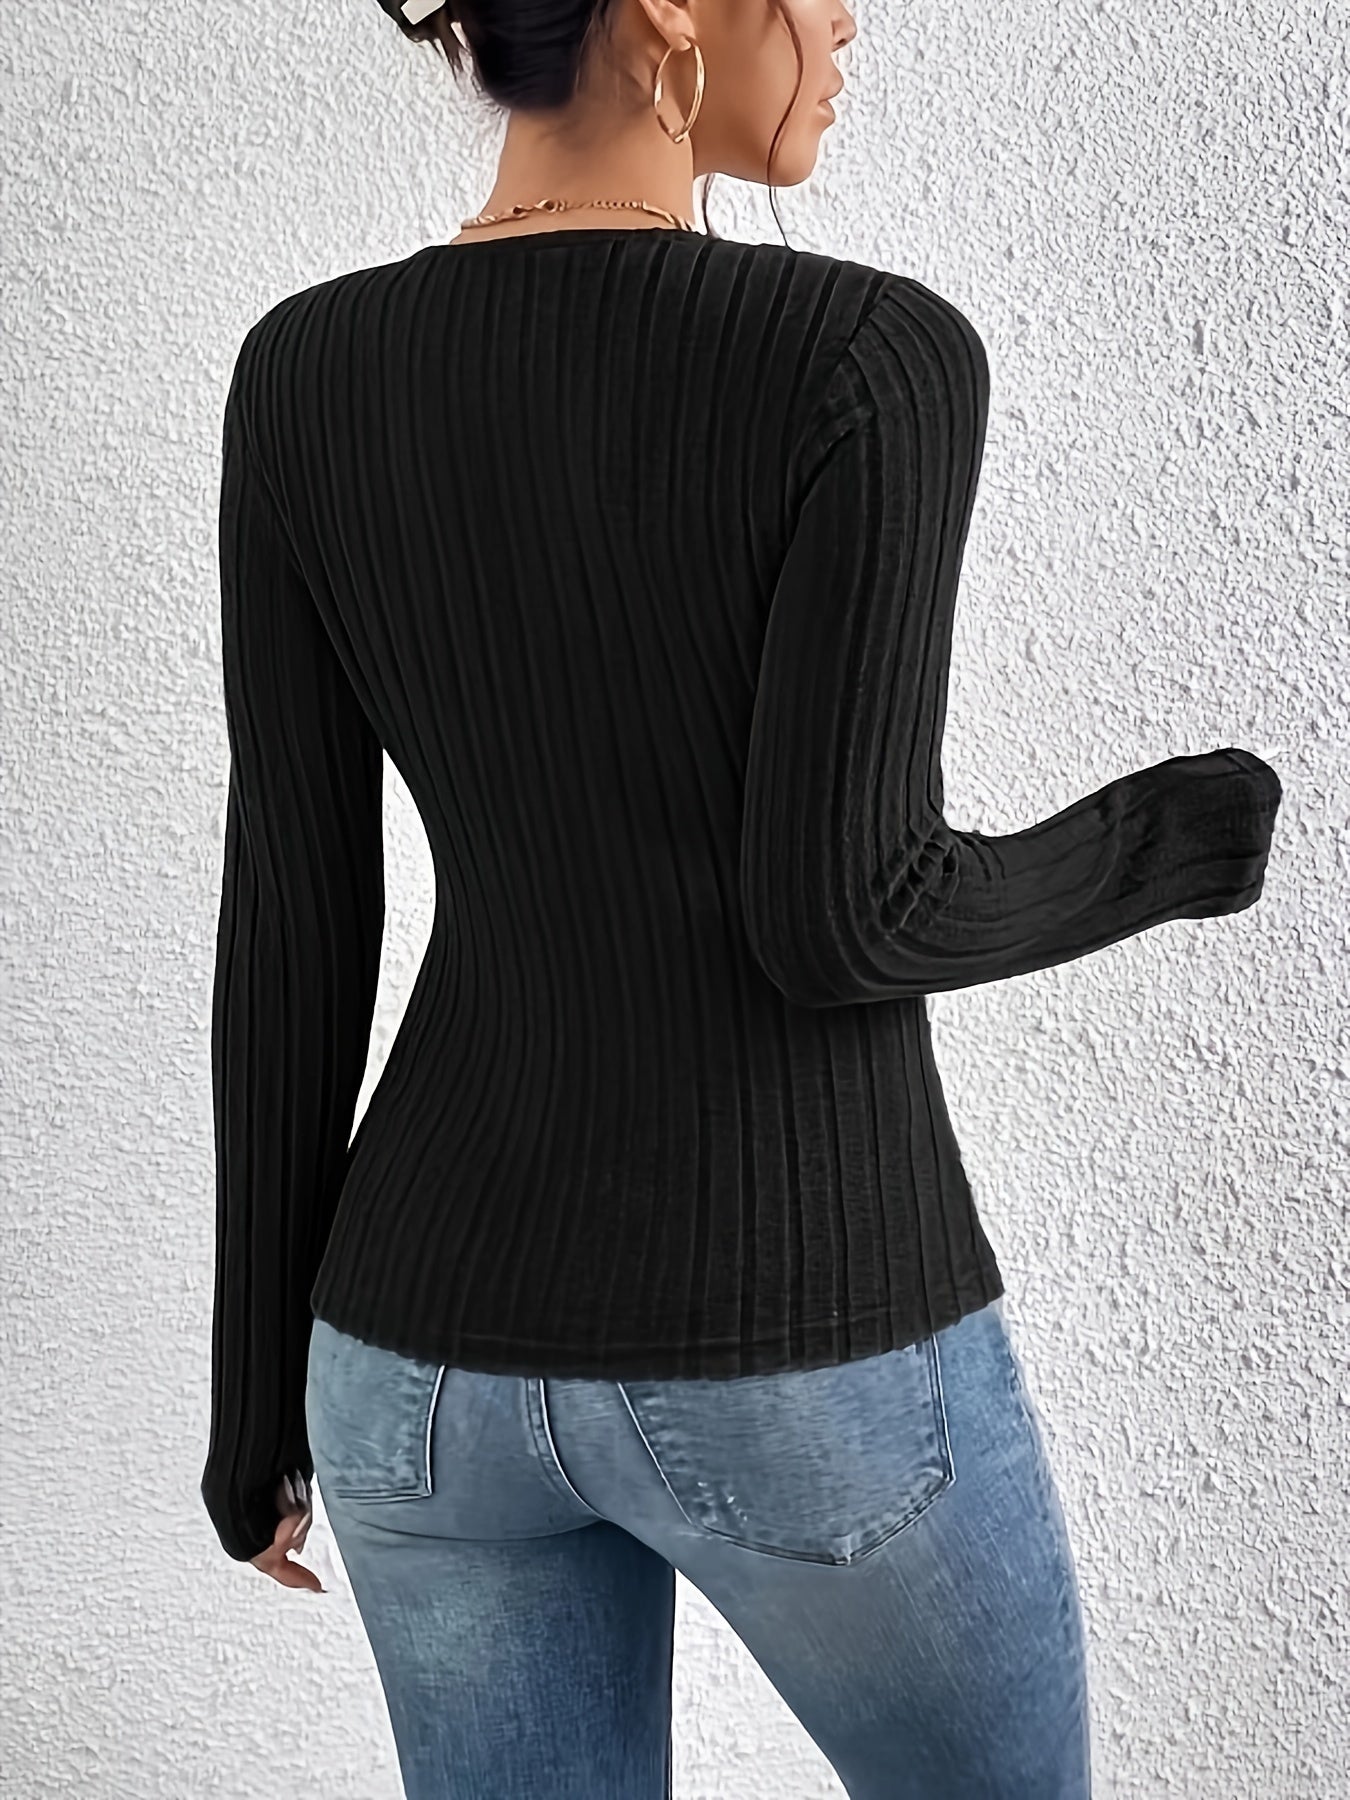 Antmvs Ribbed Cross Front V Neck T-Shirt, Casual Long Sleeve Top For Spring & Fall, Women's Clothing